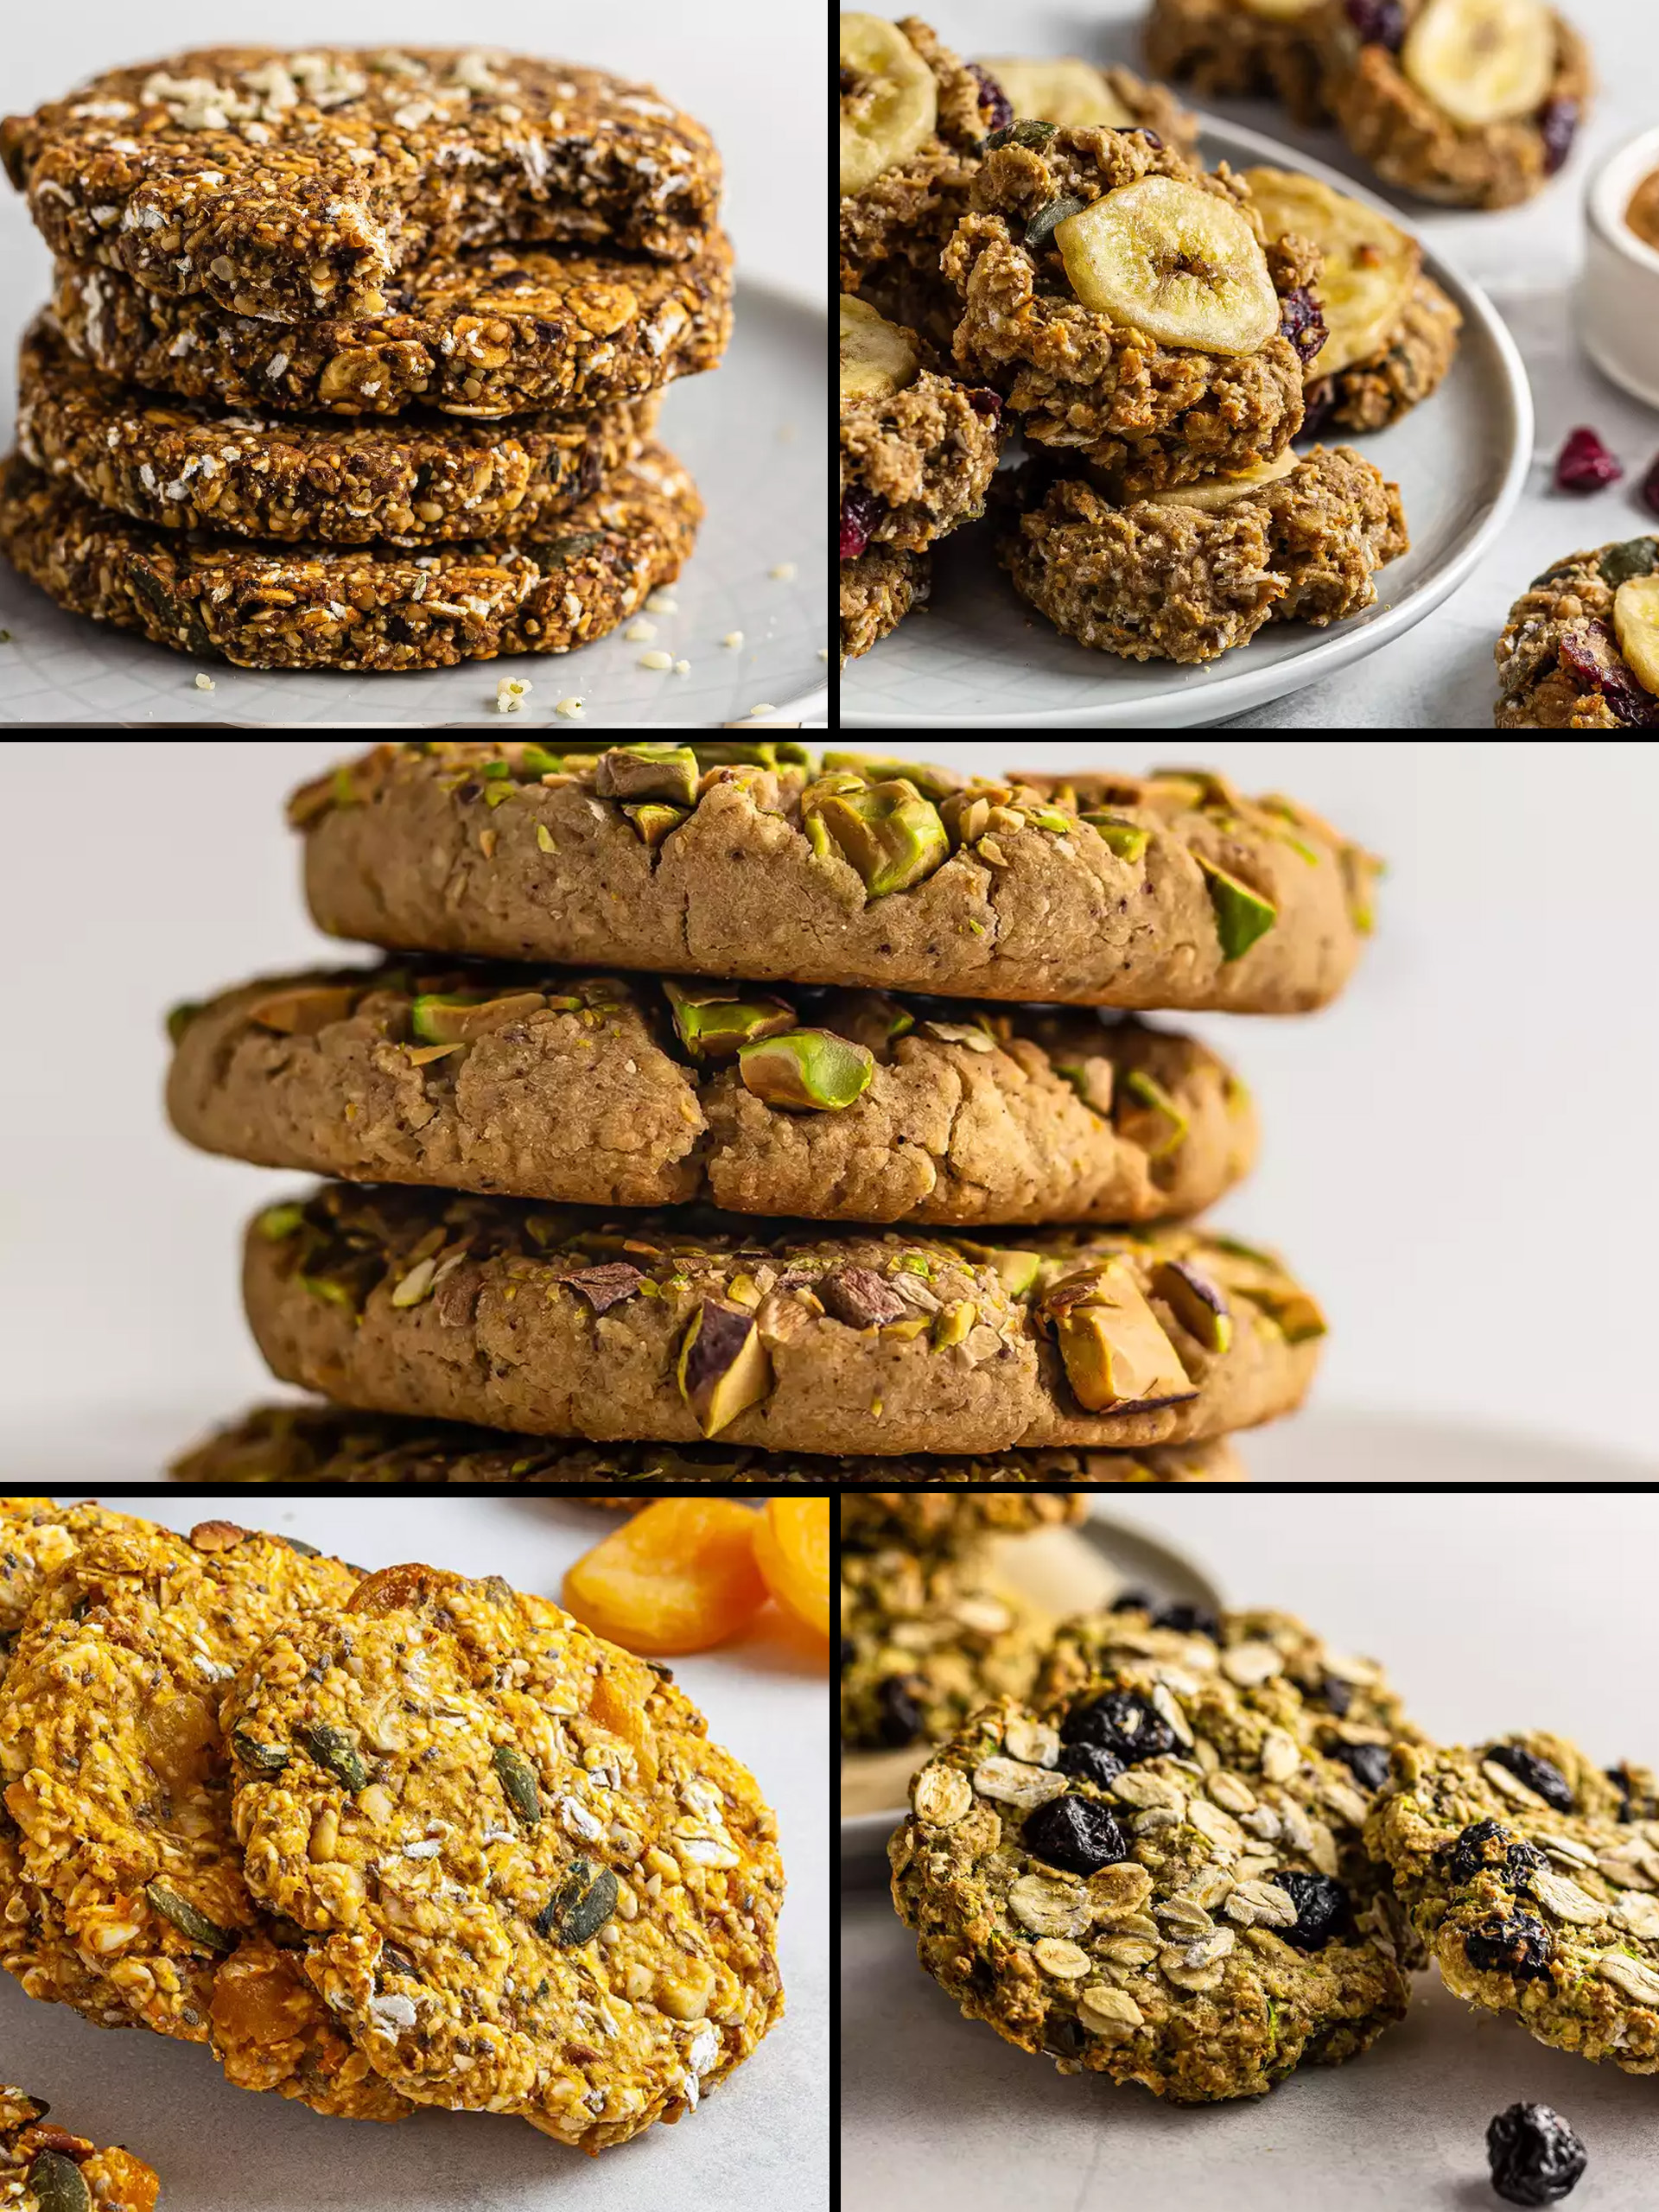 8 Ideas for Super-Healthy Oat Cookies